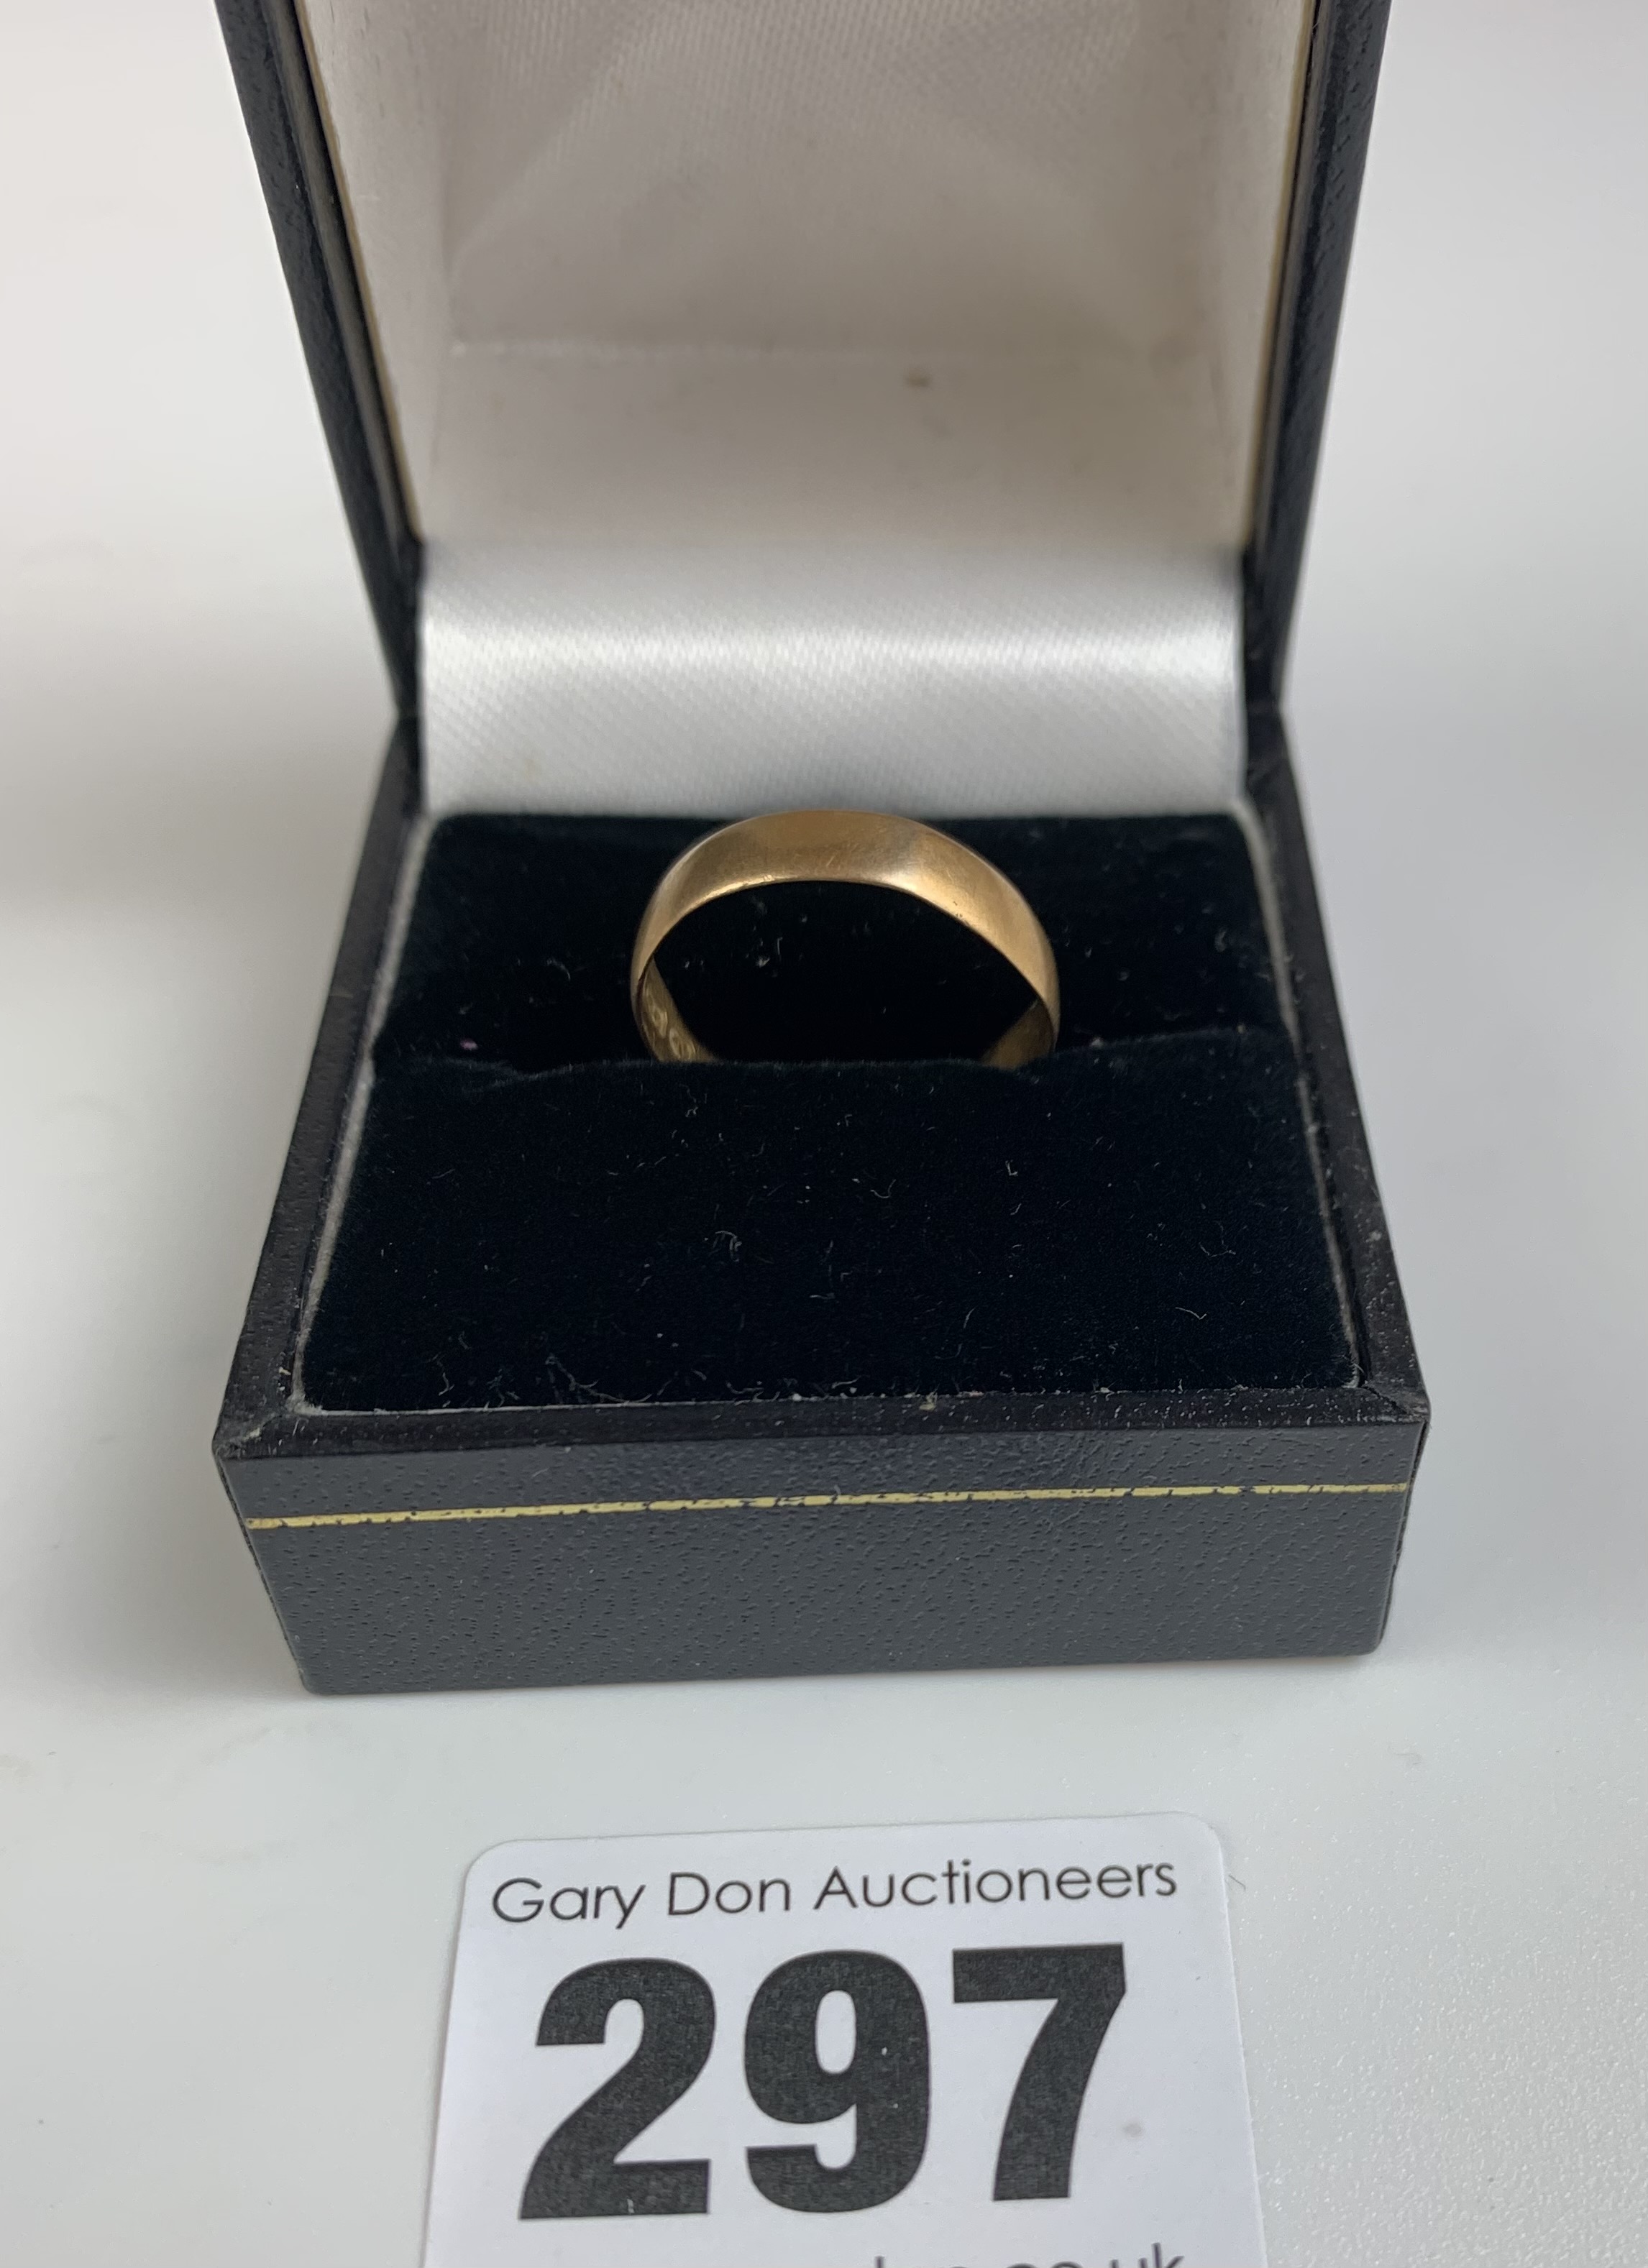 22k gold wedding band, size L, w: 1.6 gms - Image 2 of 5